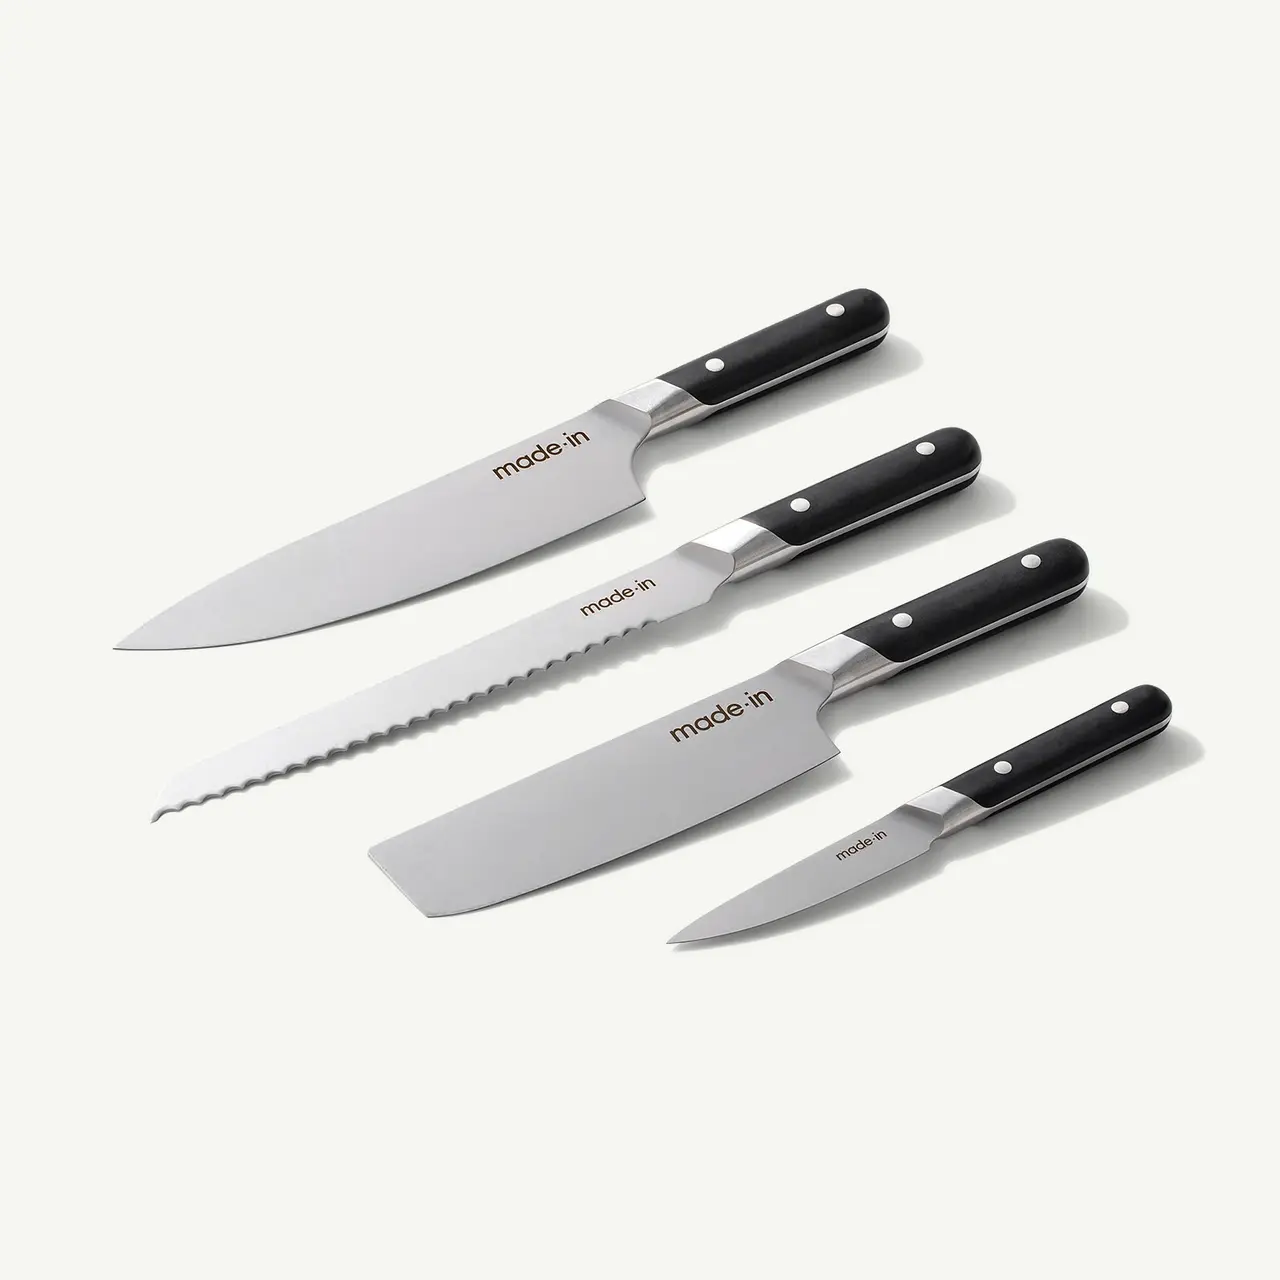 A collection of five kitchen knives with black handles, each displaying different blade designs, arranged neatly on a light background.